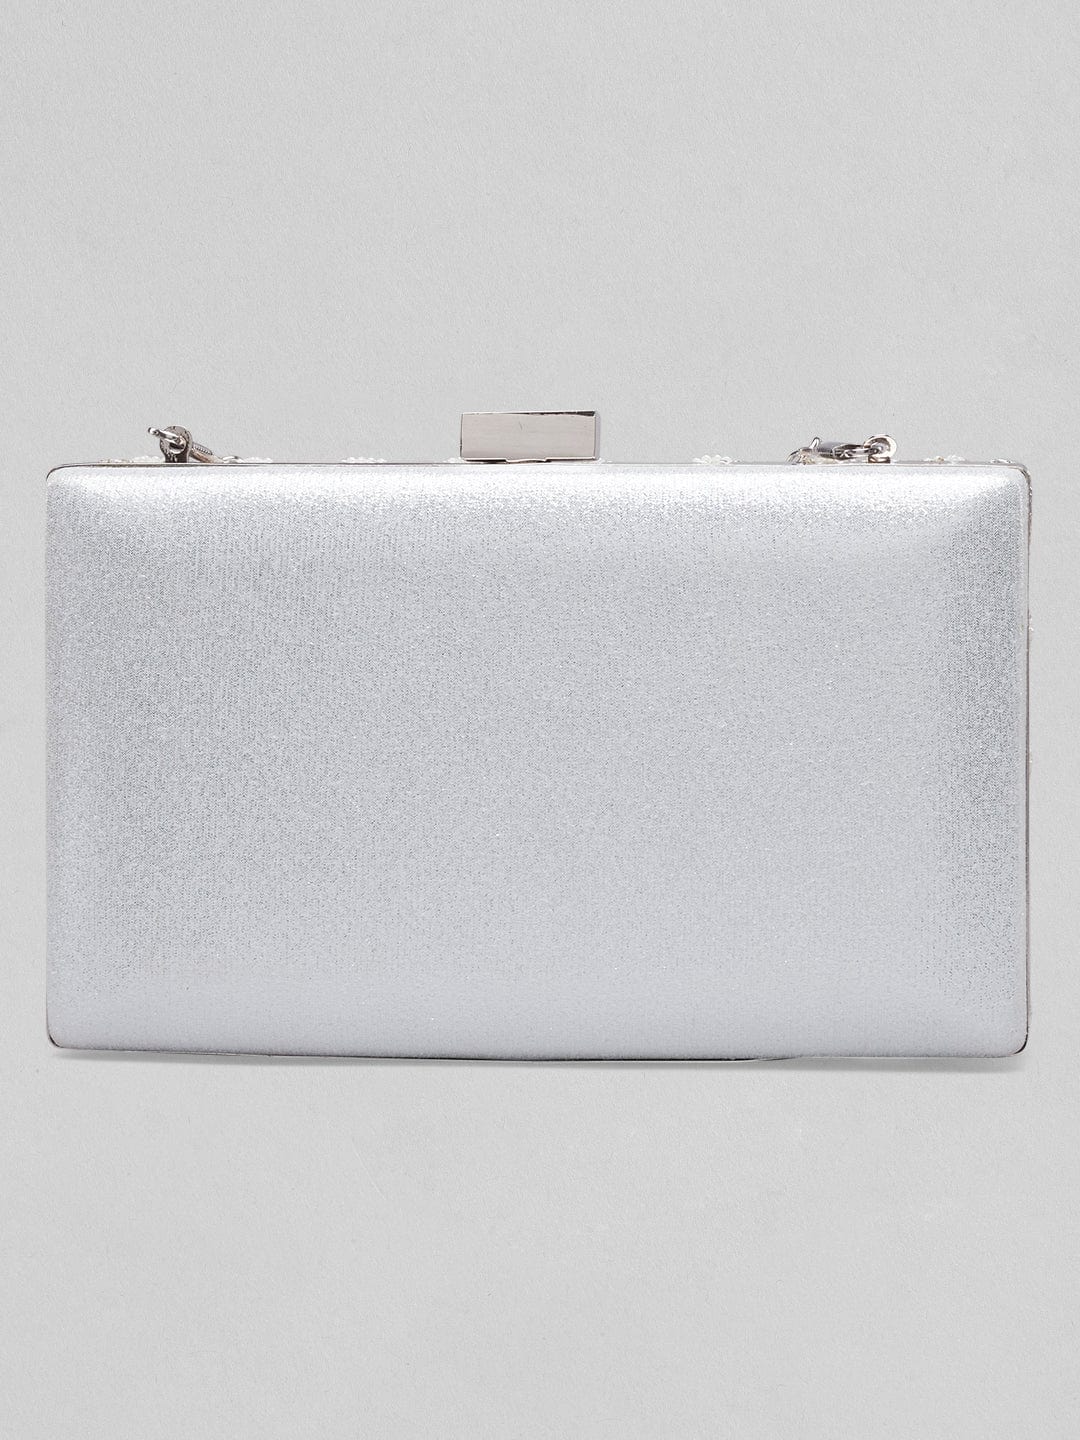 Rubans Off White Coloured Clutch Bag With Shells And Embroided White Design. Handbag & Wallet Accessories